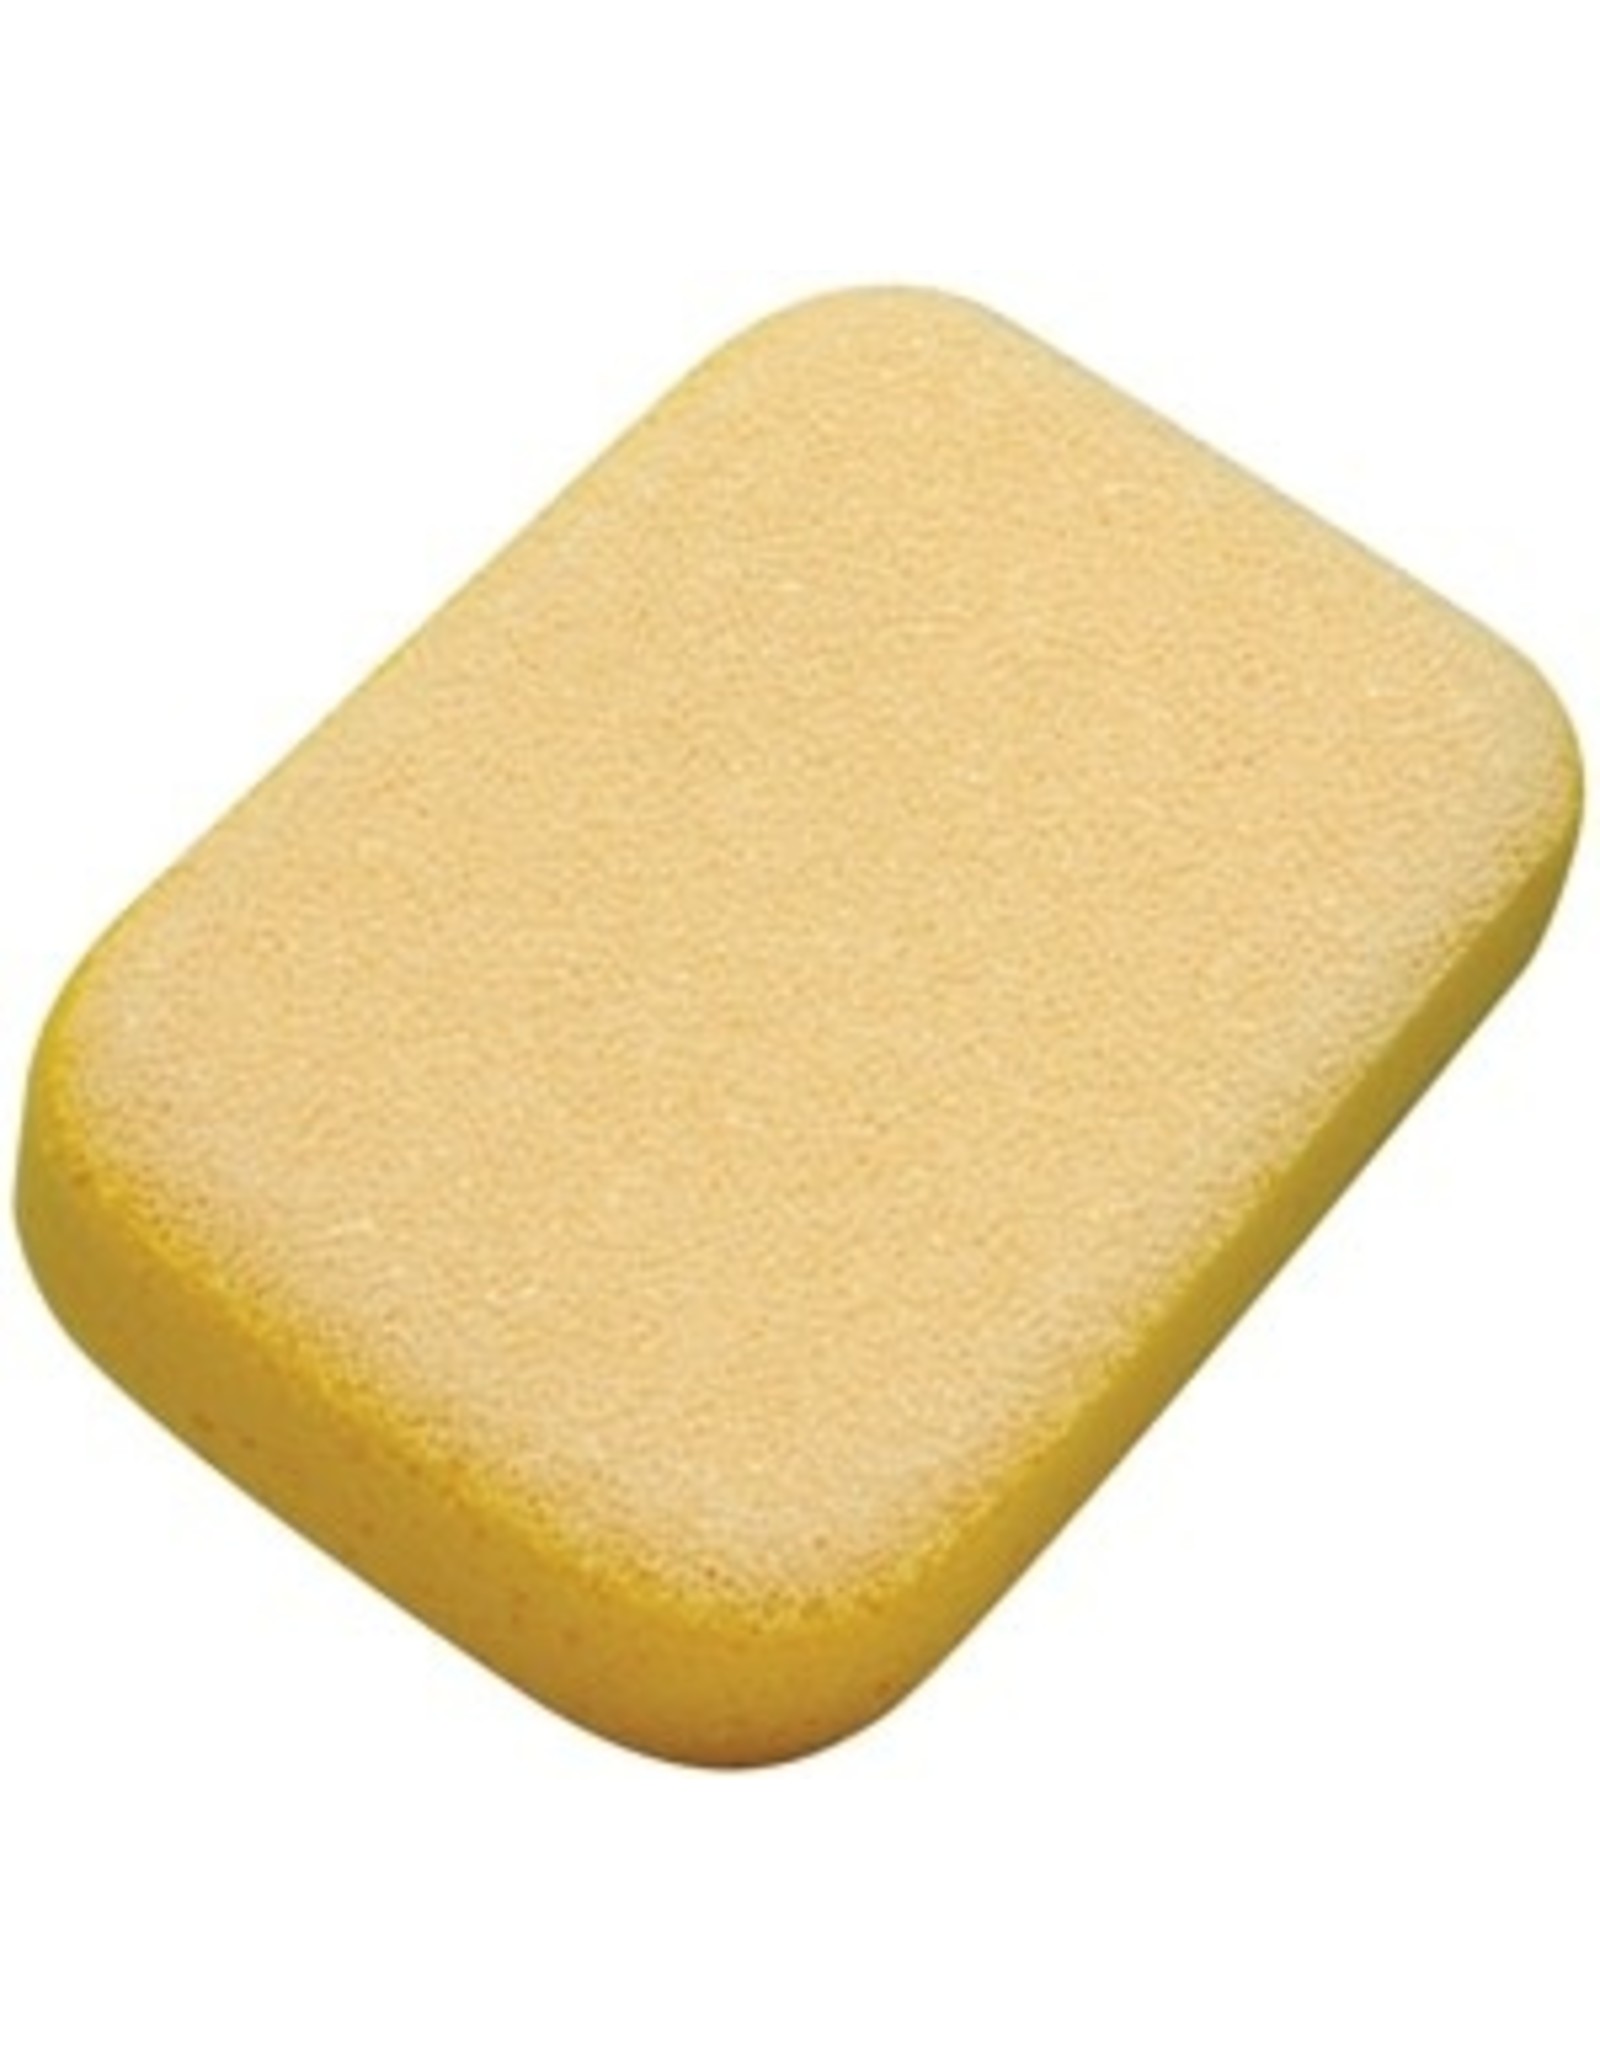 M-D Building Products M-D 49156 Double-Textured Scrubbing Sponge, 7 in L, 5 in W, Yellow*